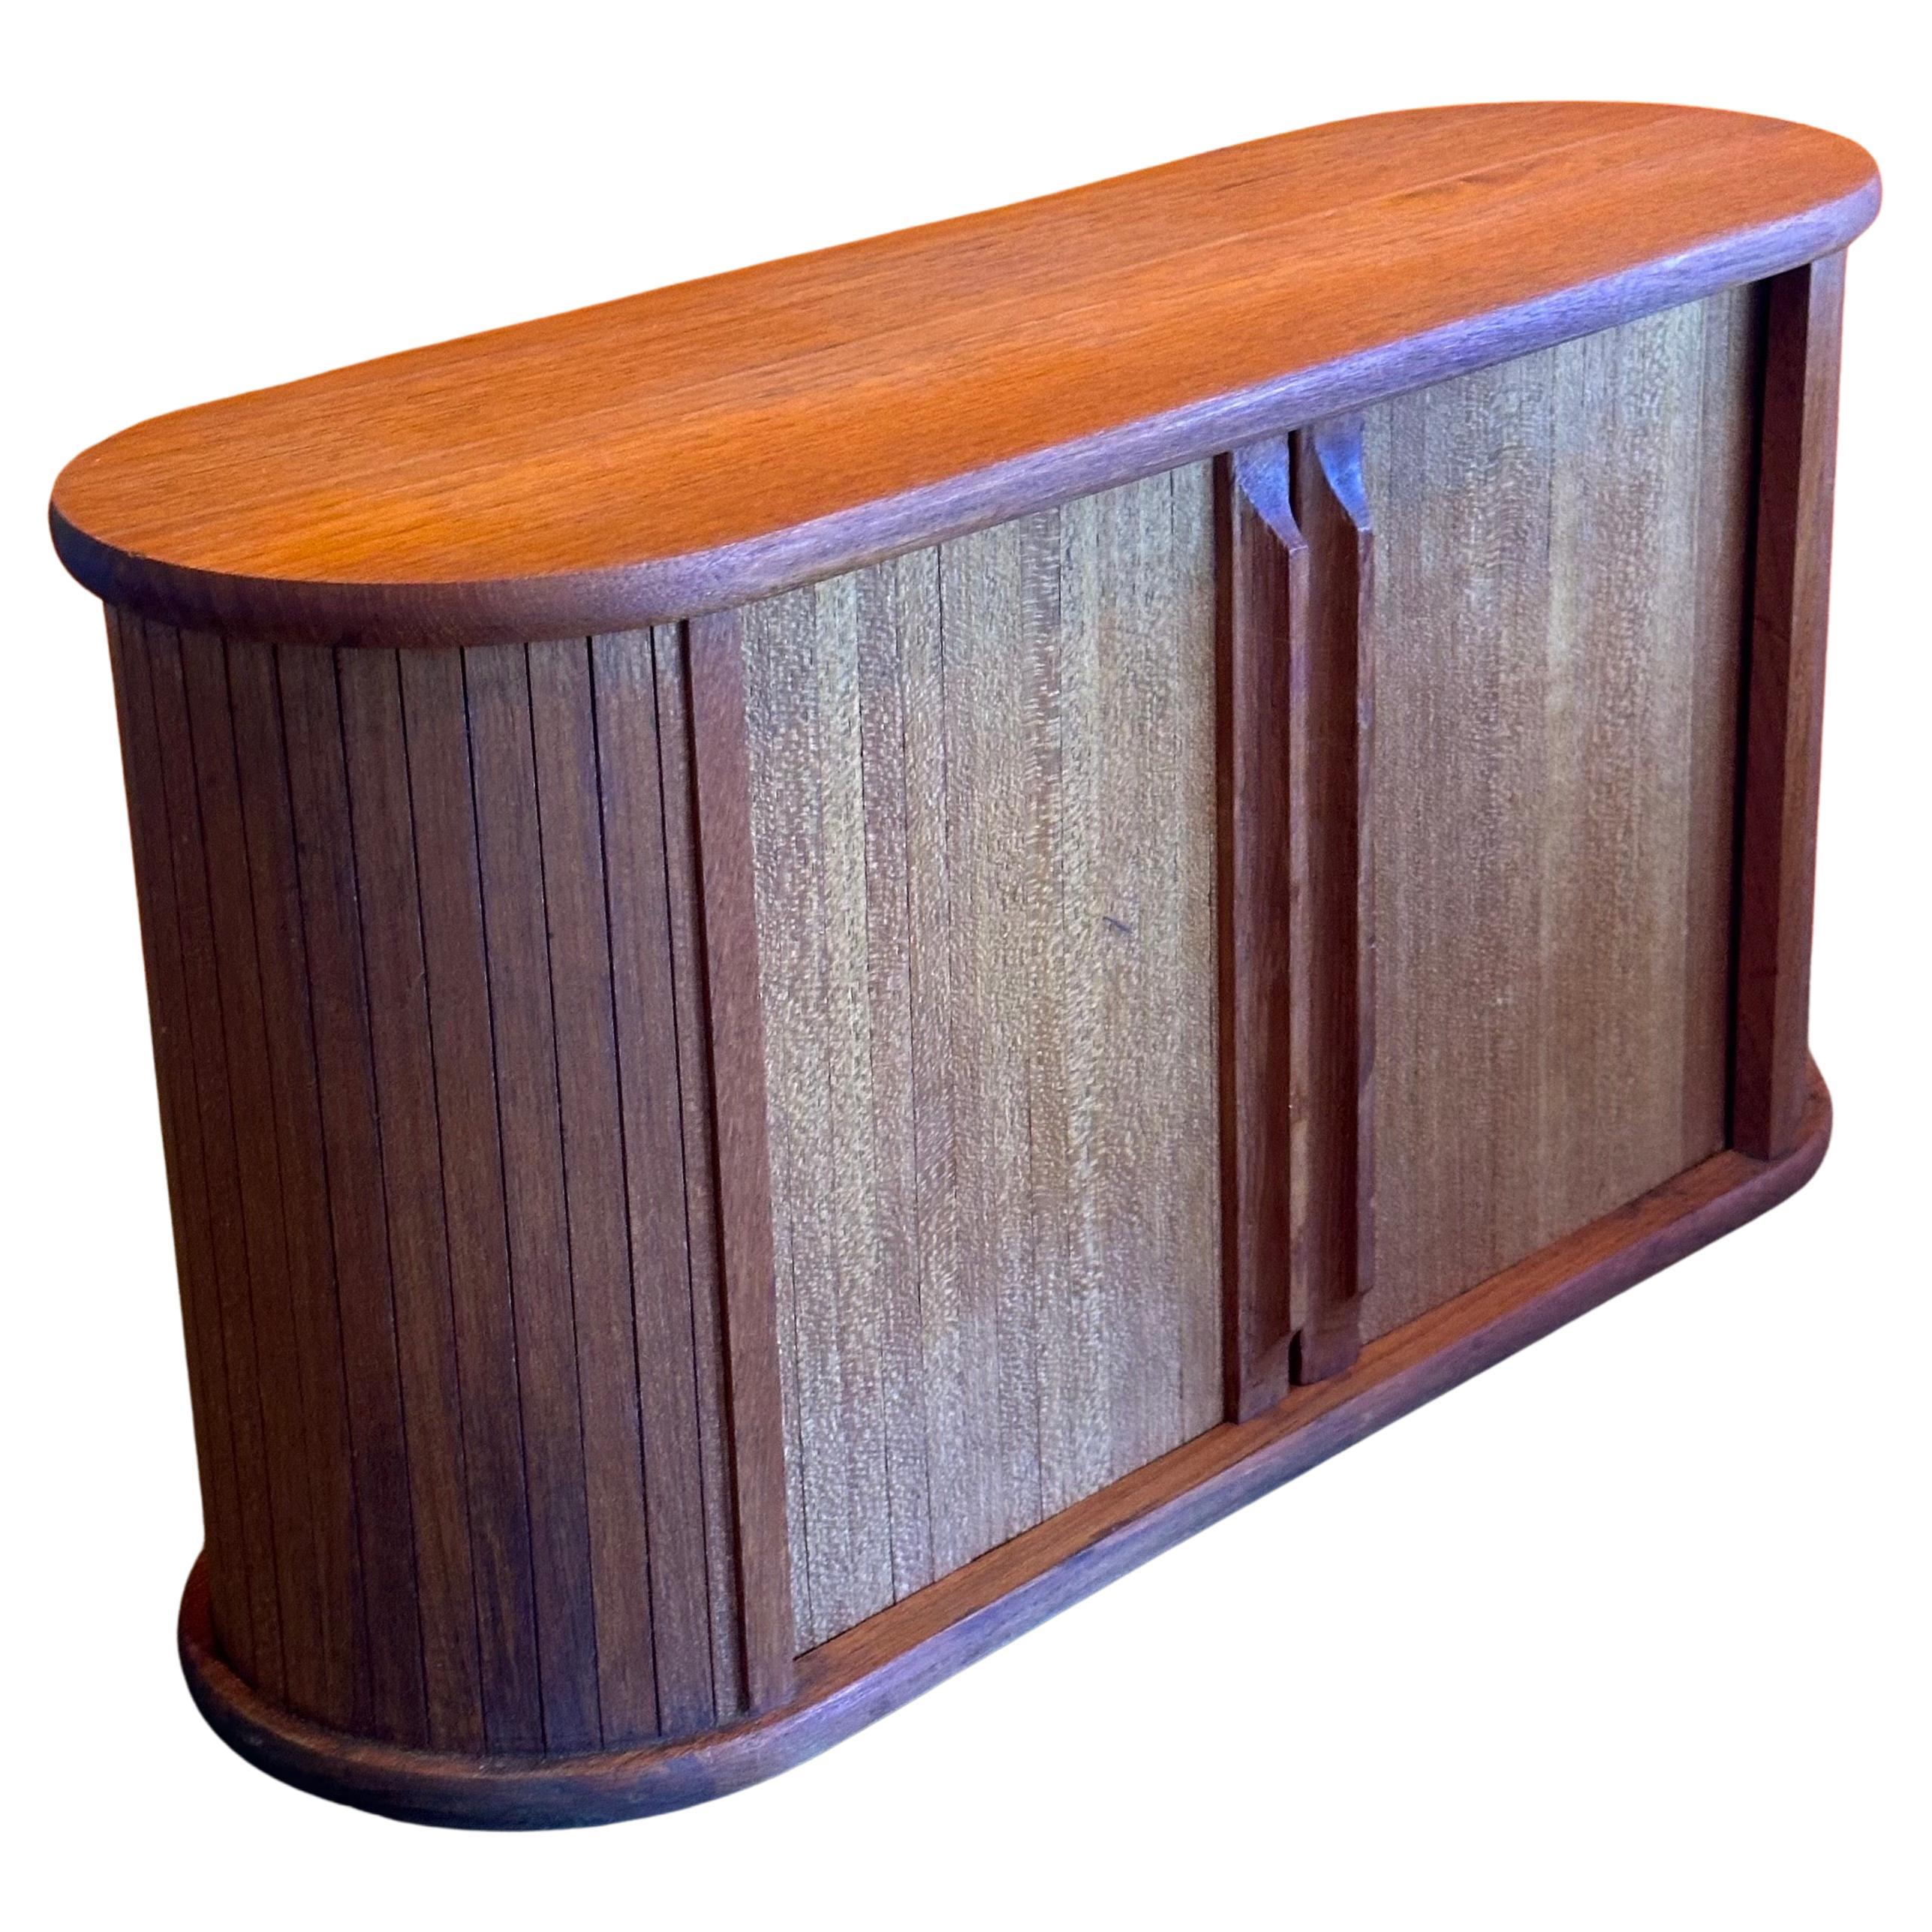 Danish modern teak tambour door hanging storage cabinet, circa 1970s.  This beautiful well crafted box can be hung on a wall or used on a desk top.  The piece is in very good vintage condition and measures 18